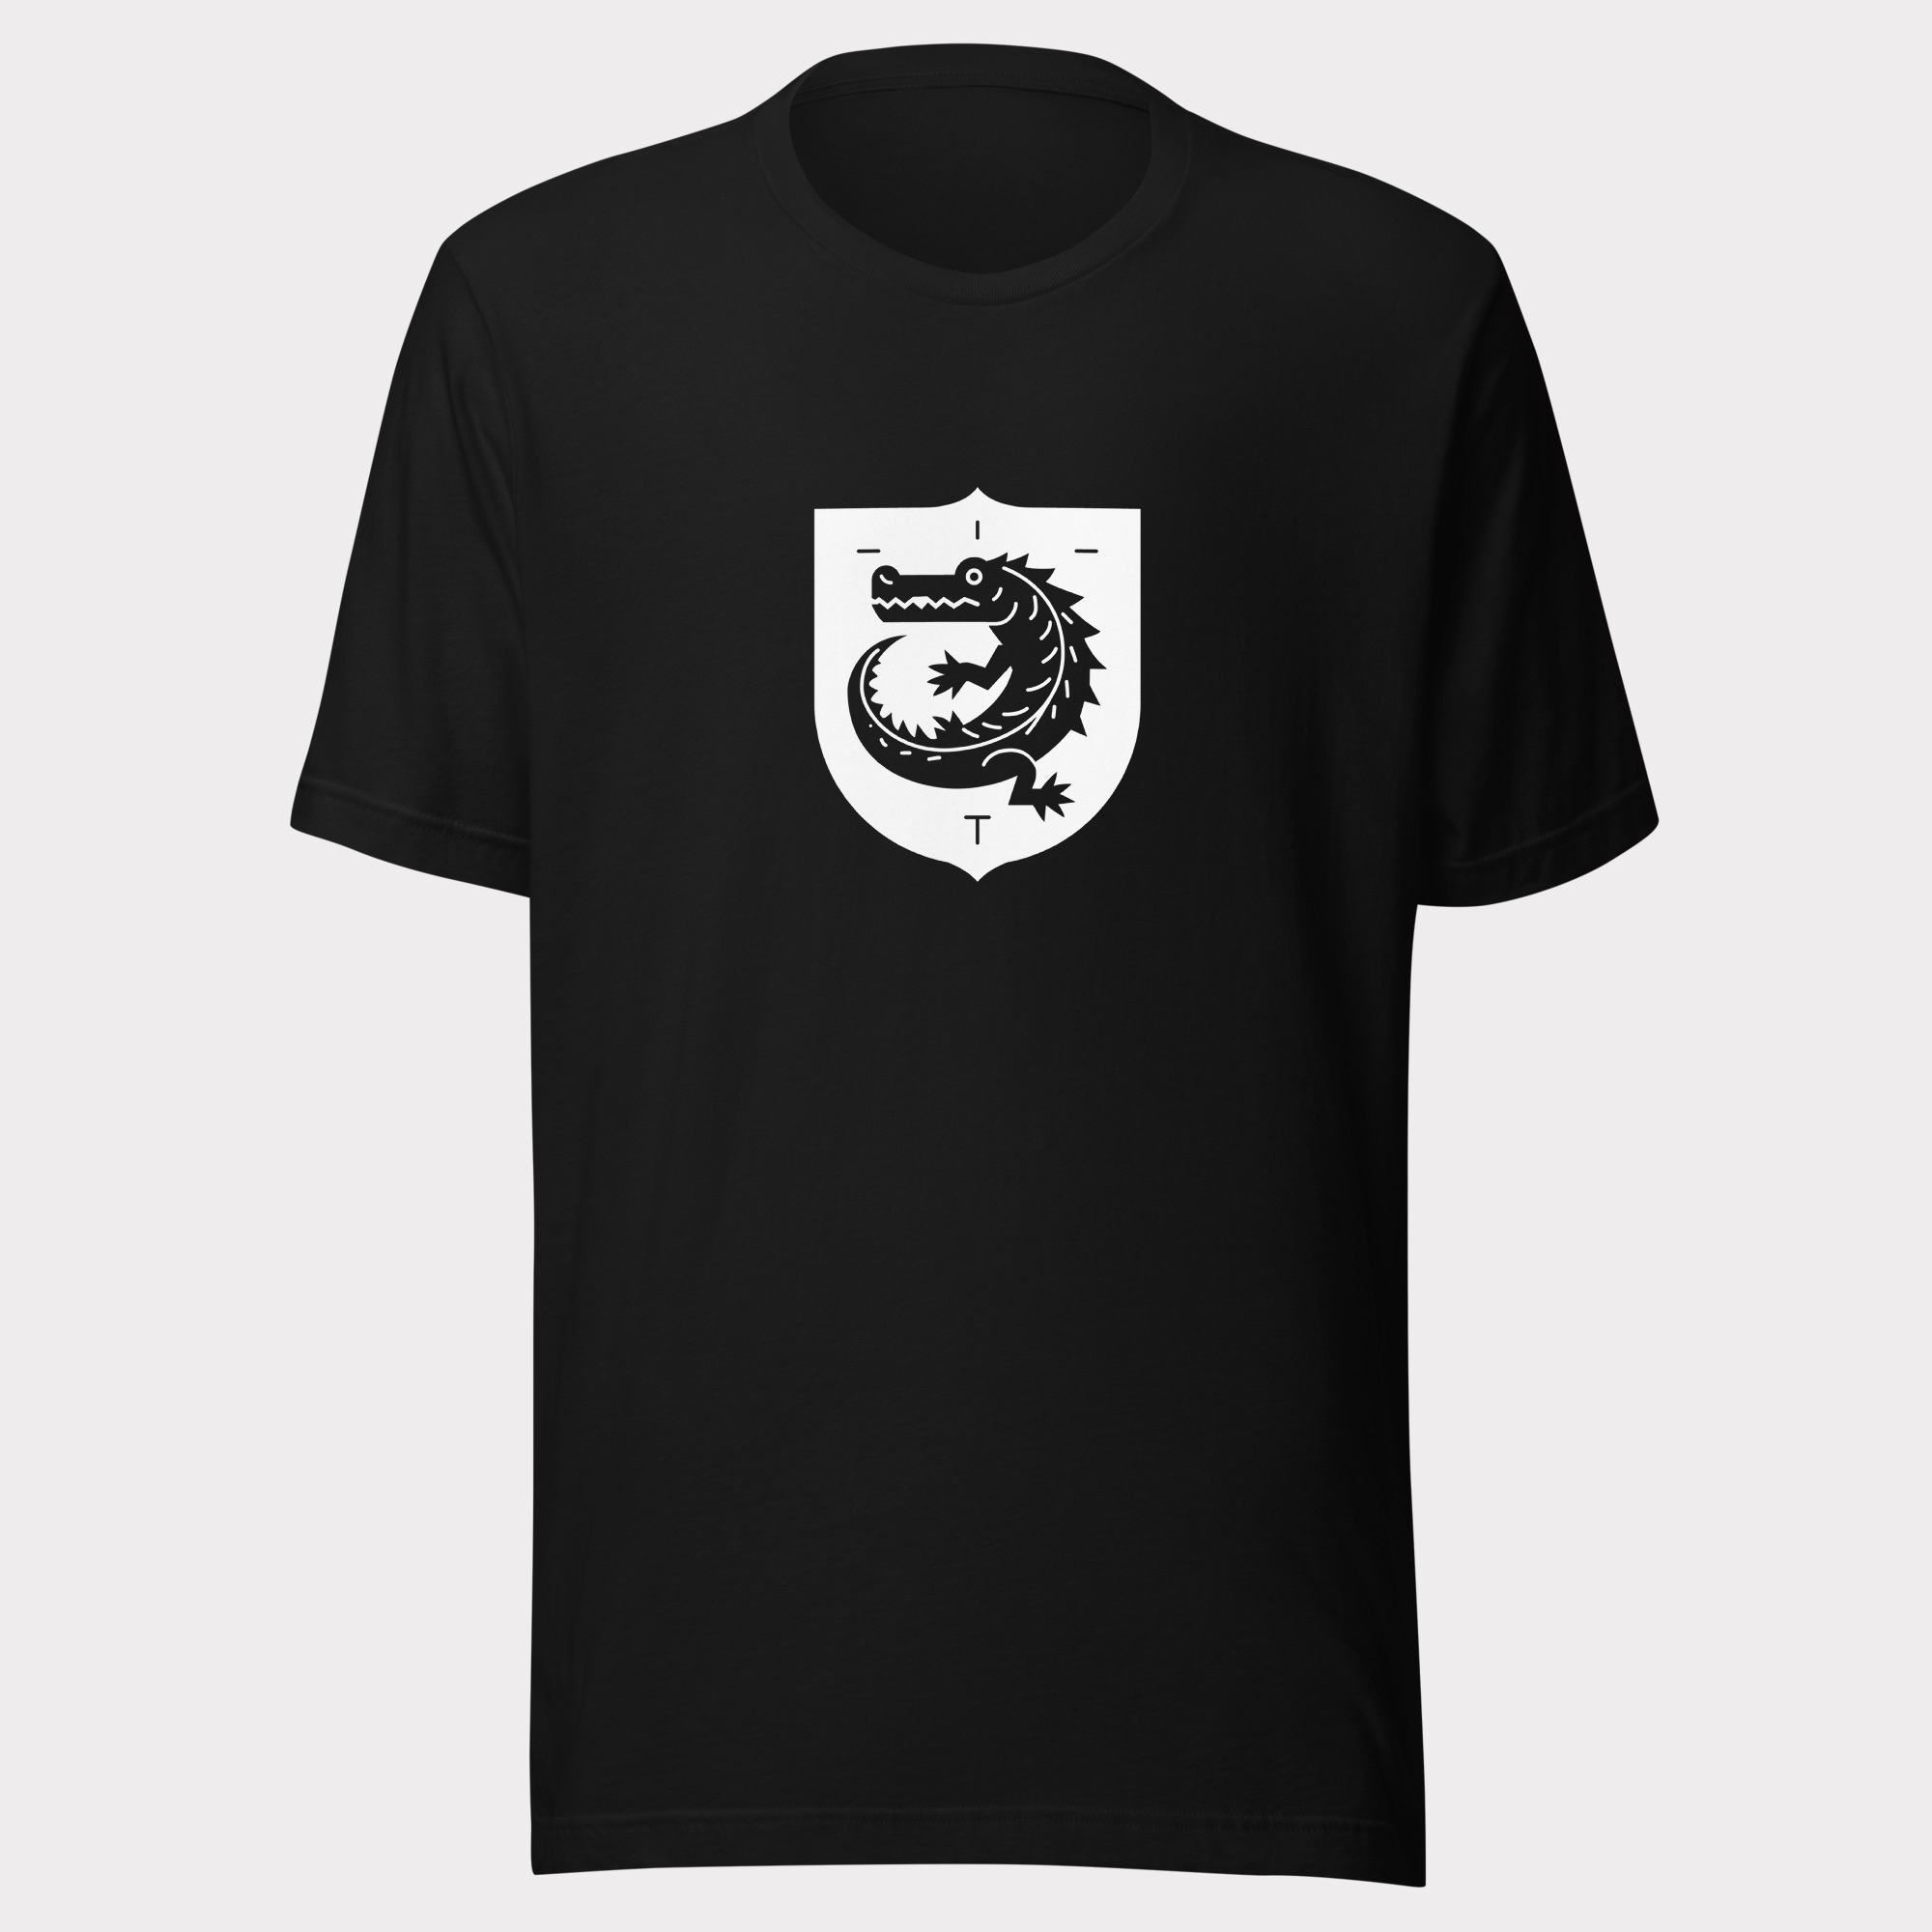 The black tee printed with the white Surprised Crocodilian made with a crocodile inside a blazon